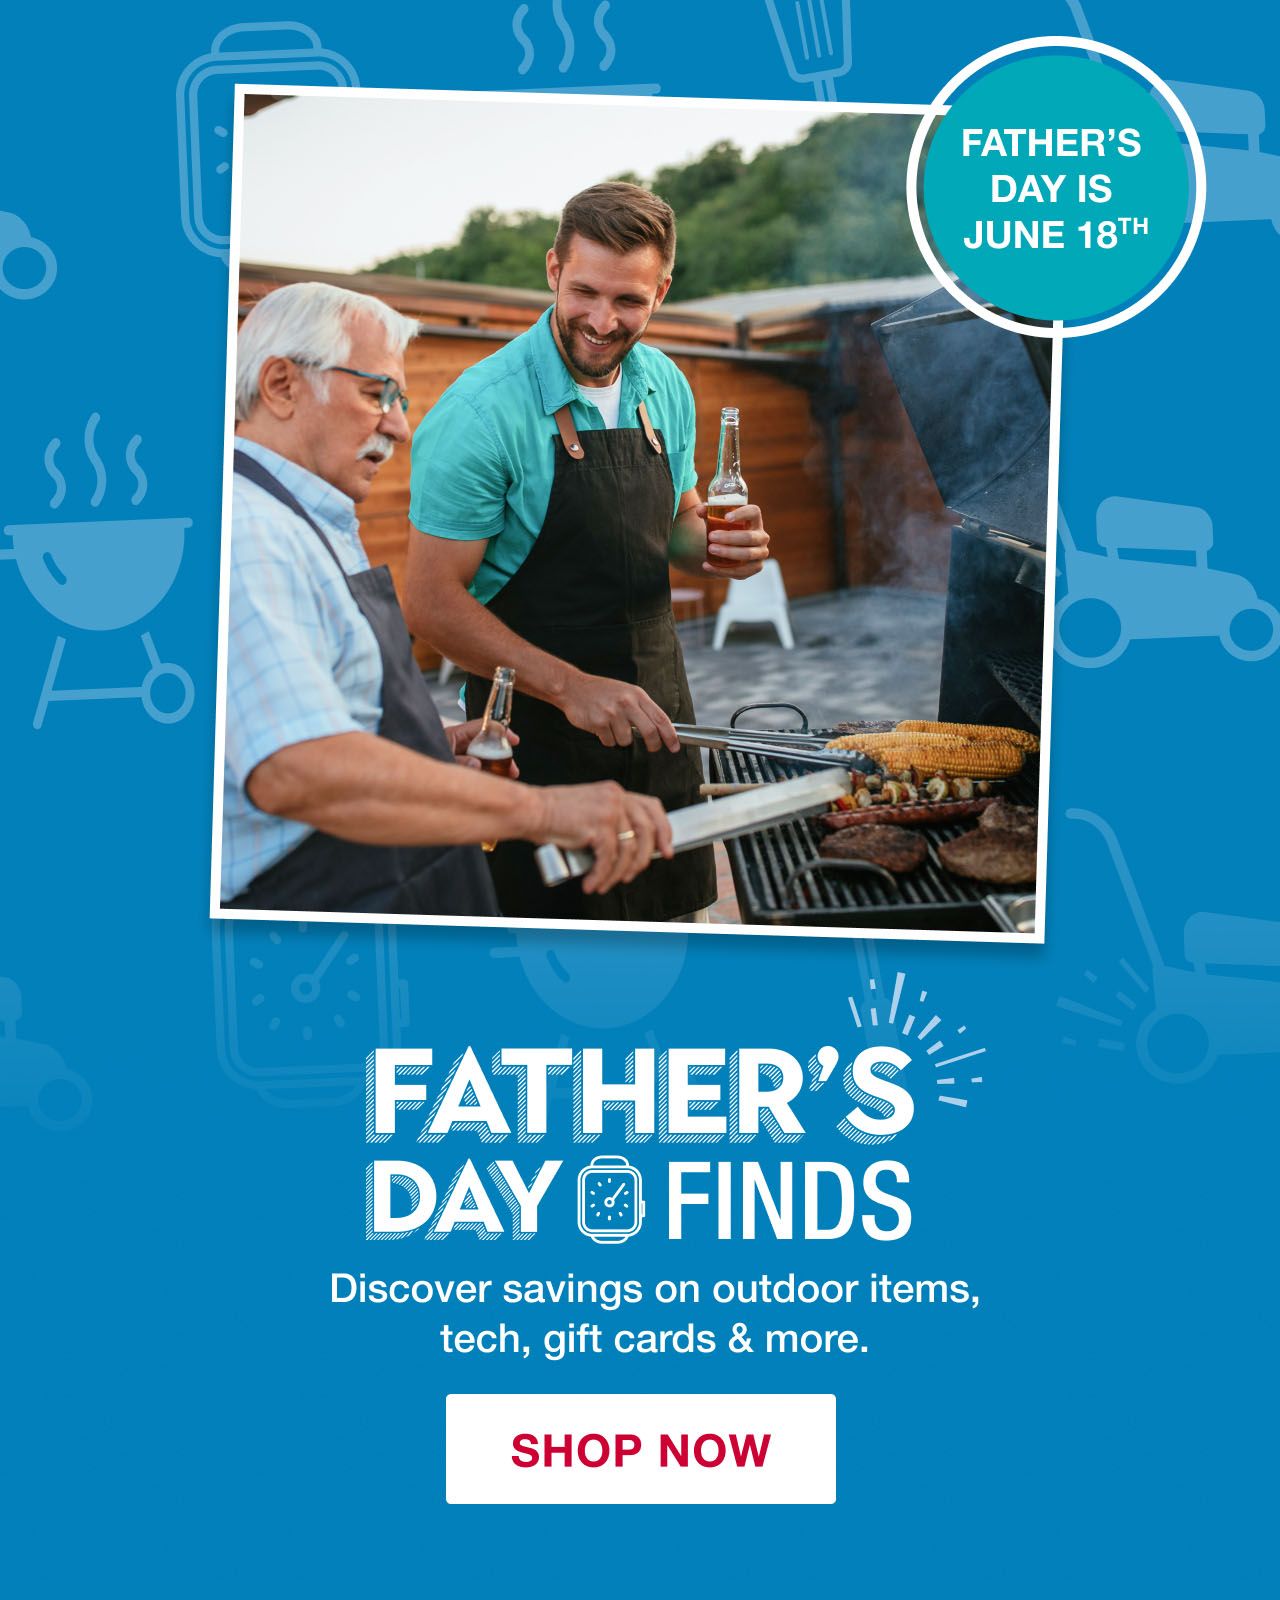 Father's Day Finds. Discover savings on outdoor items, tech, gift cards and more. Fatrhers day is June 18th. Click to shop tires.